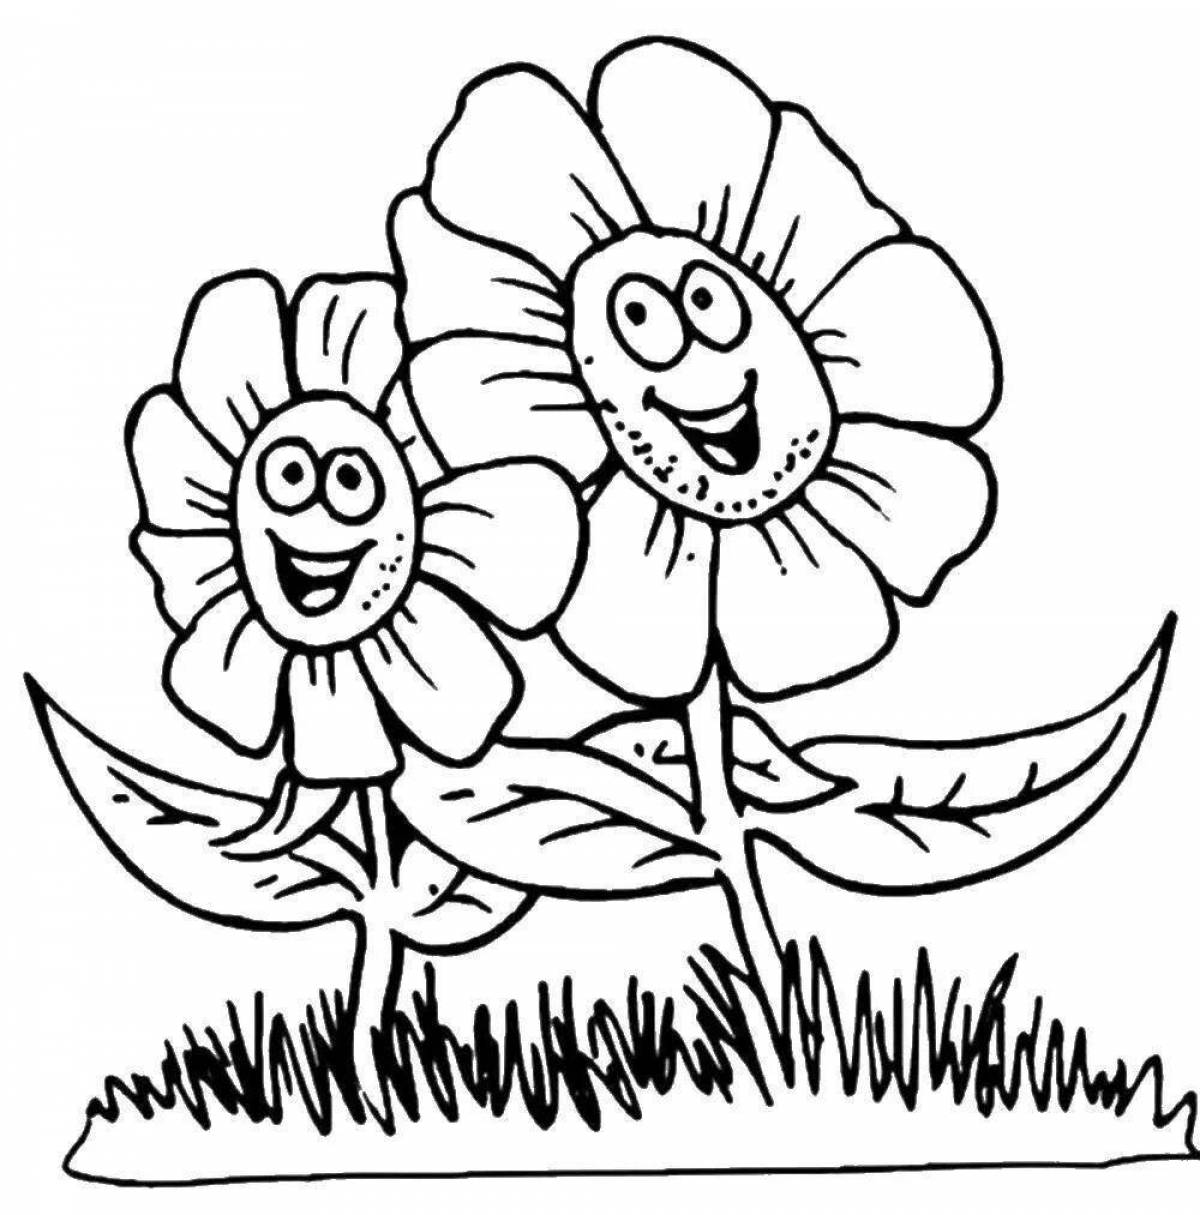 Amazing coloring pages of plants for kids